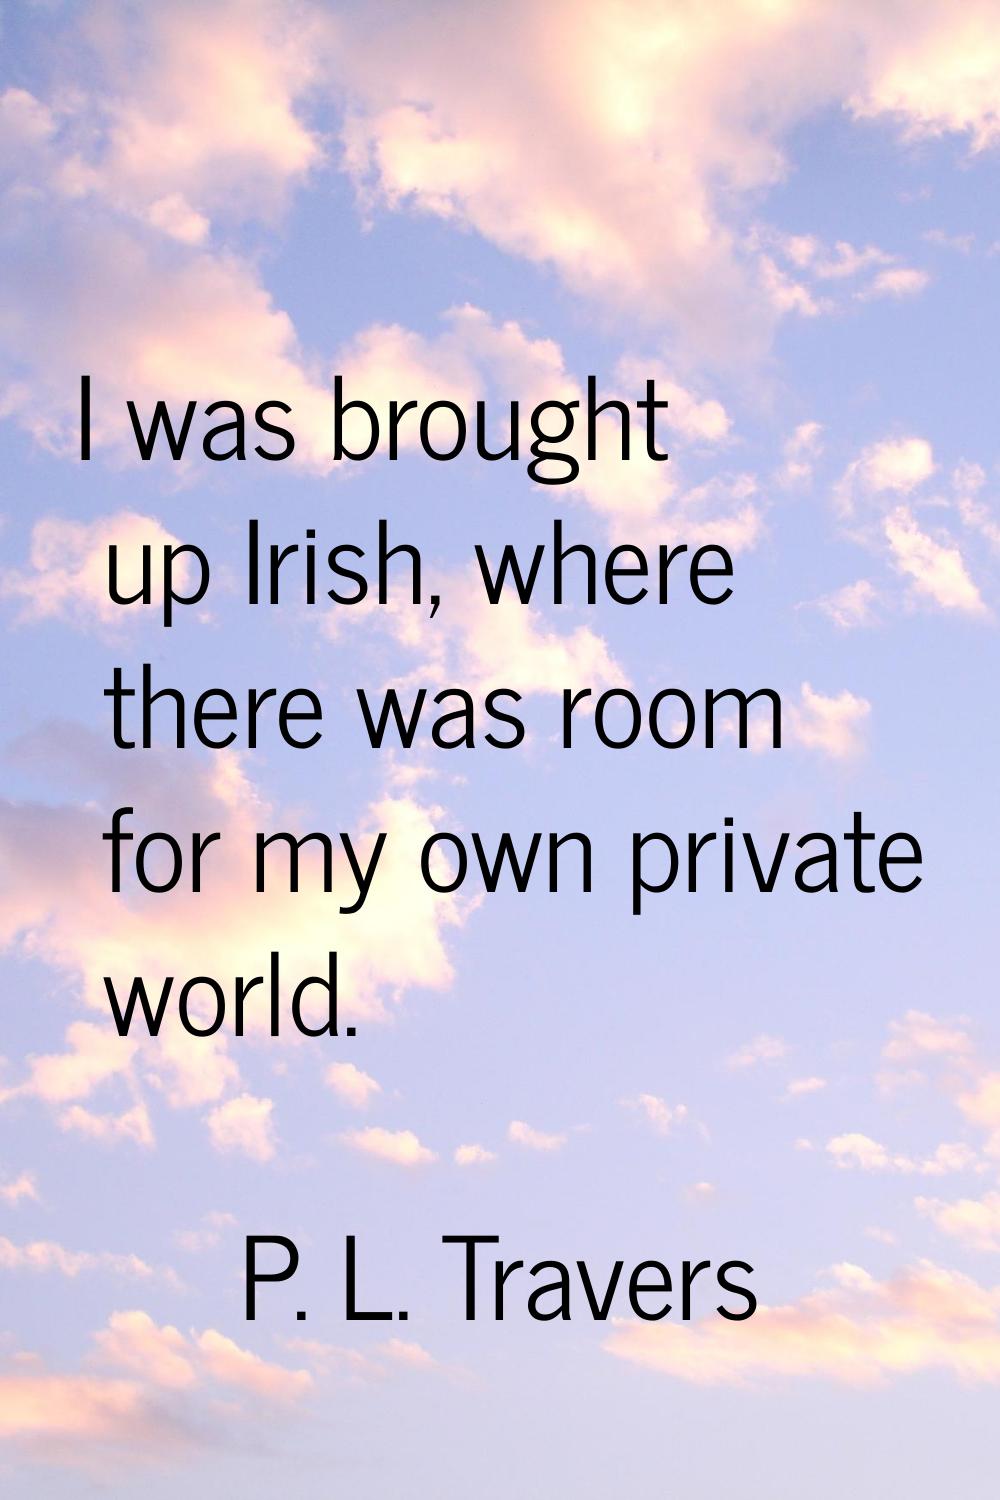 I was brought up Irish, where there was room for my own private world.